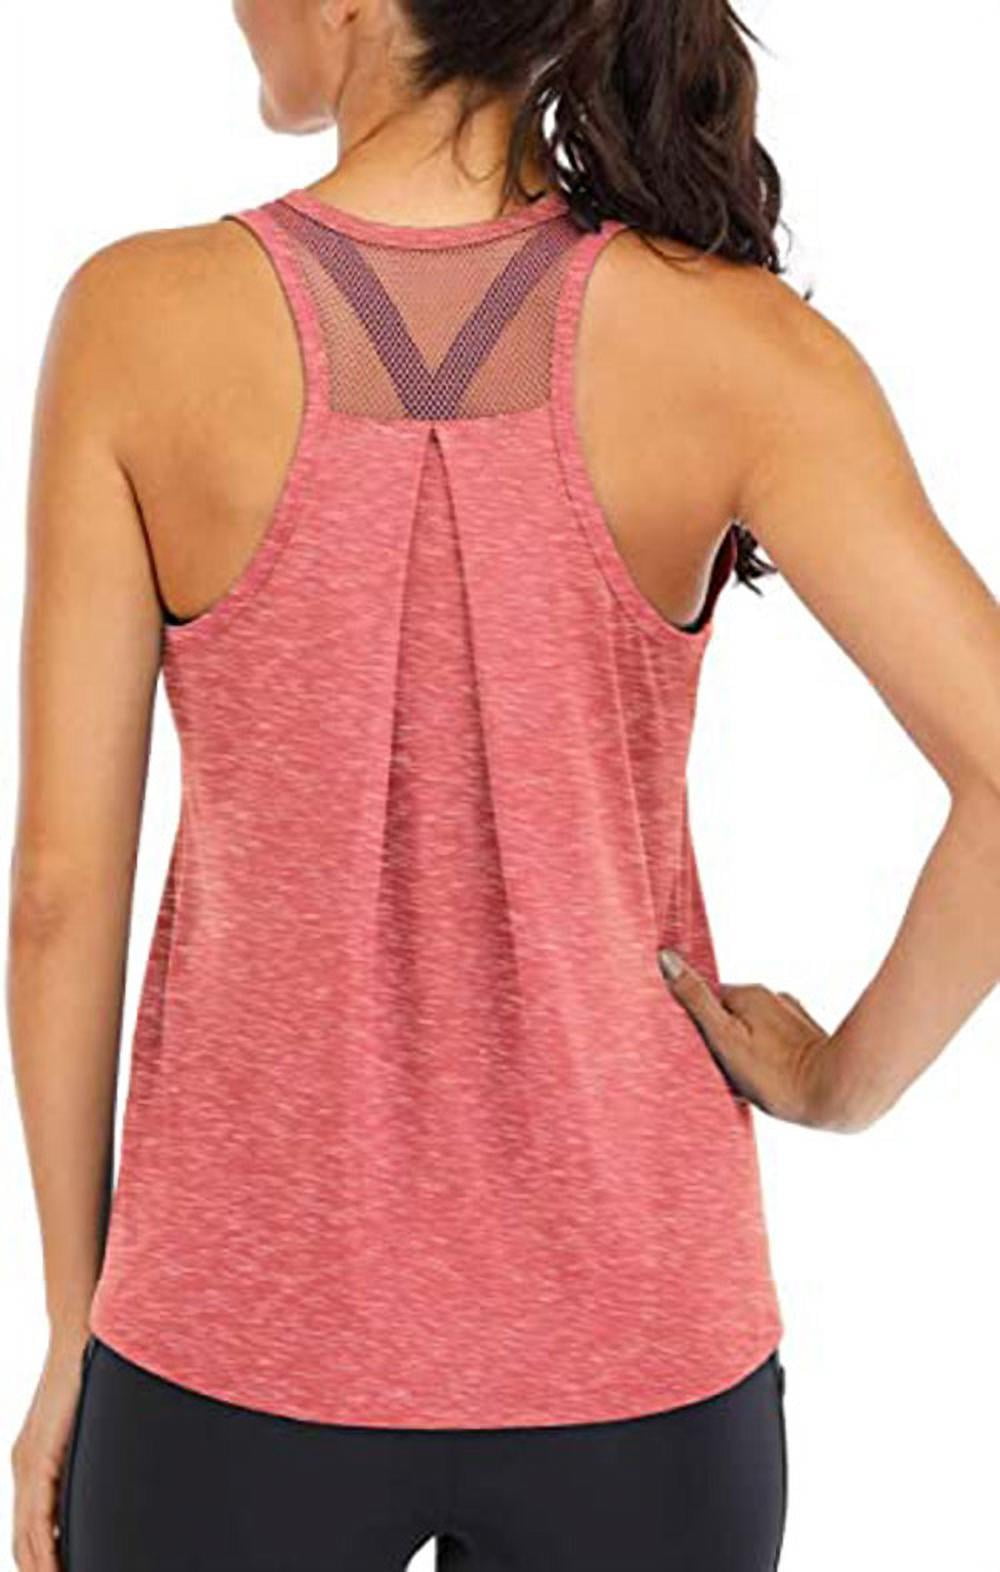 Tank Tops for Women Loose Fit Workout Tops for Women Racerback Mesh Backless Muscle Yoga Athletic Shirts 